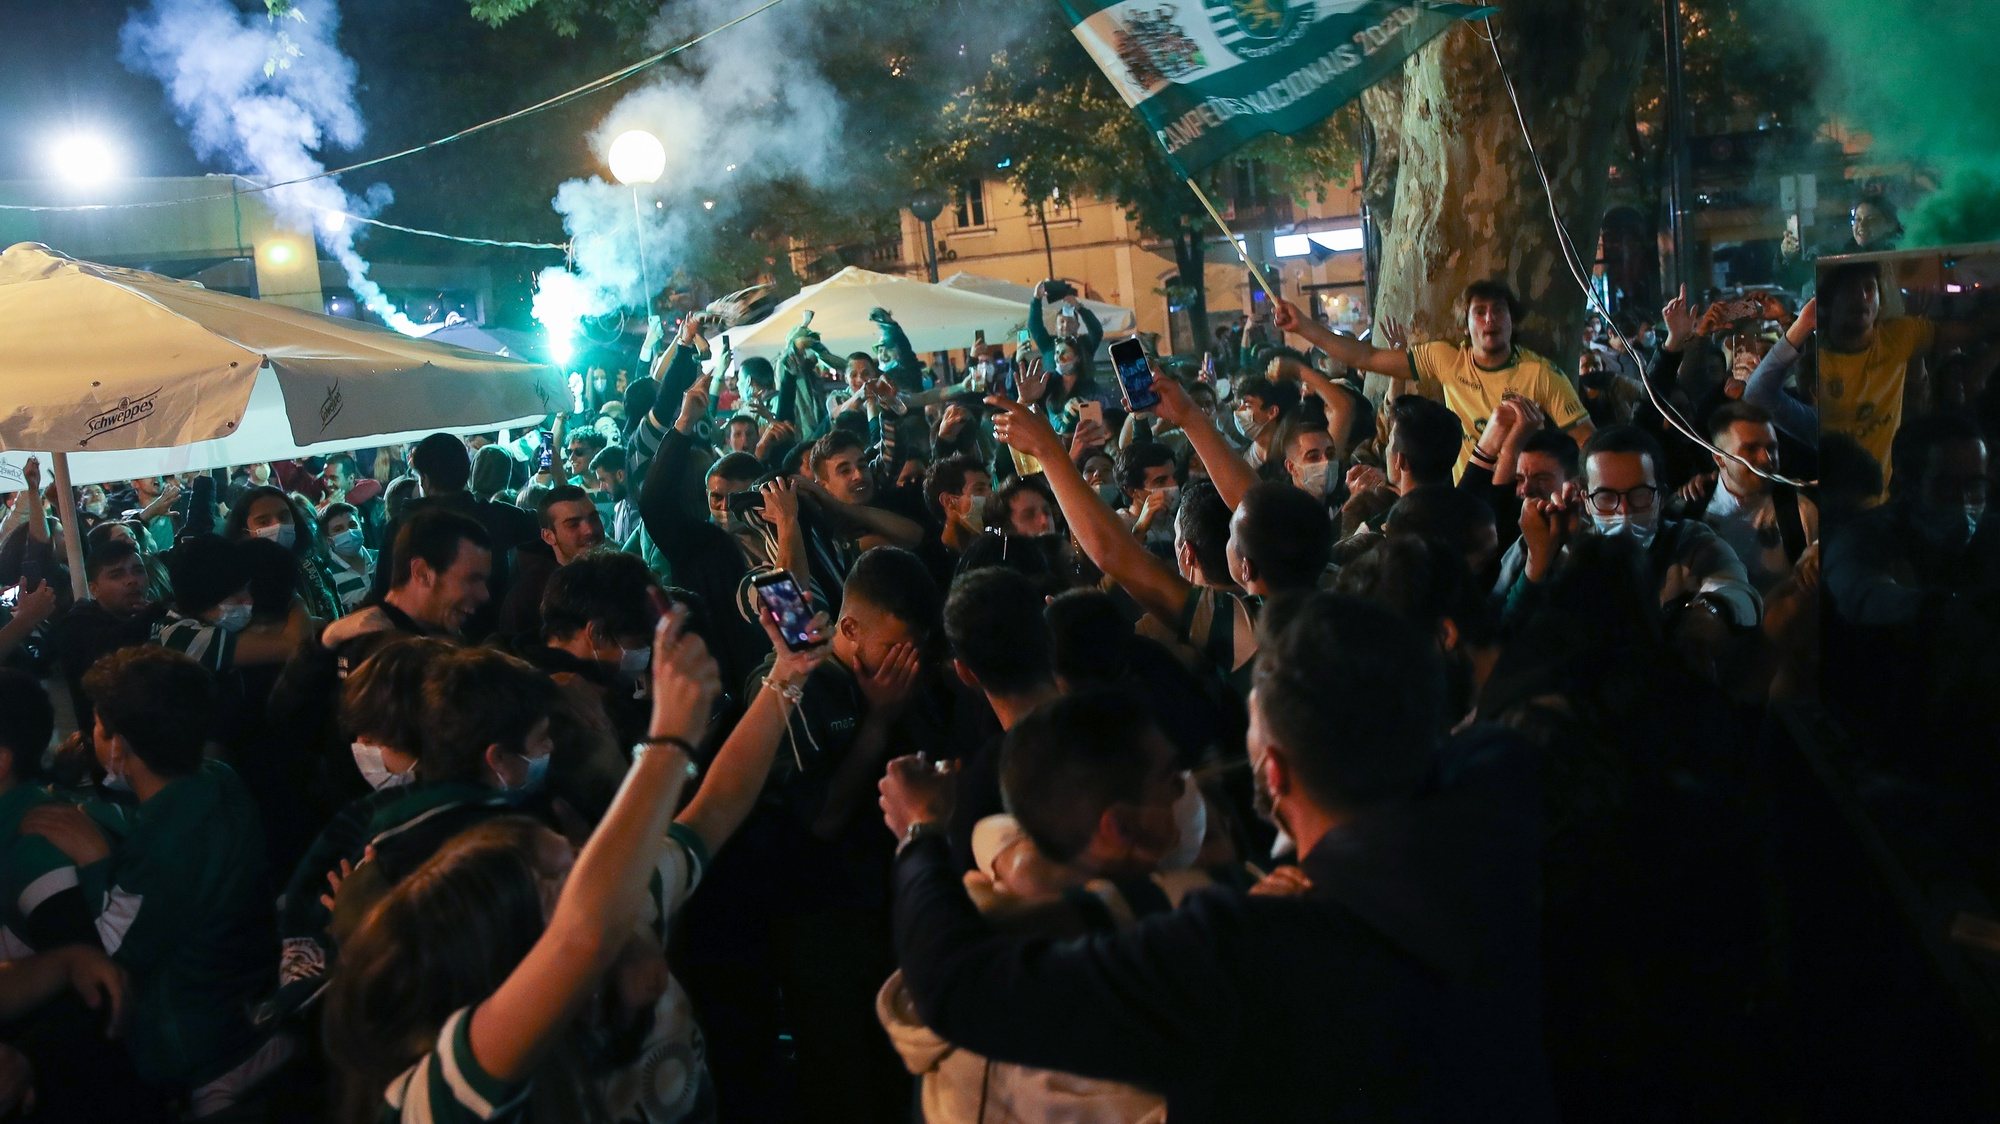 epa09192604 Sporting supporters celebrate the First League Soccer title at Republica square, in Coimbra, Portugal, 11 May 2021. Sporting of Lisbon defeated Boavista in their Portuguese First League soccer match conquering the First League trophy of the season 2020/2021, a trophy the team has been chasing since the season 2001/2002.  EPA/PAULO NOVAIS